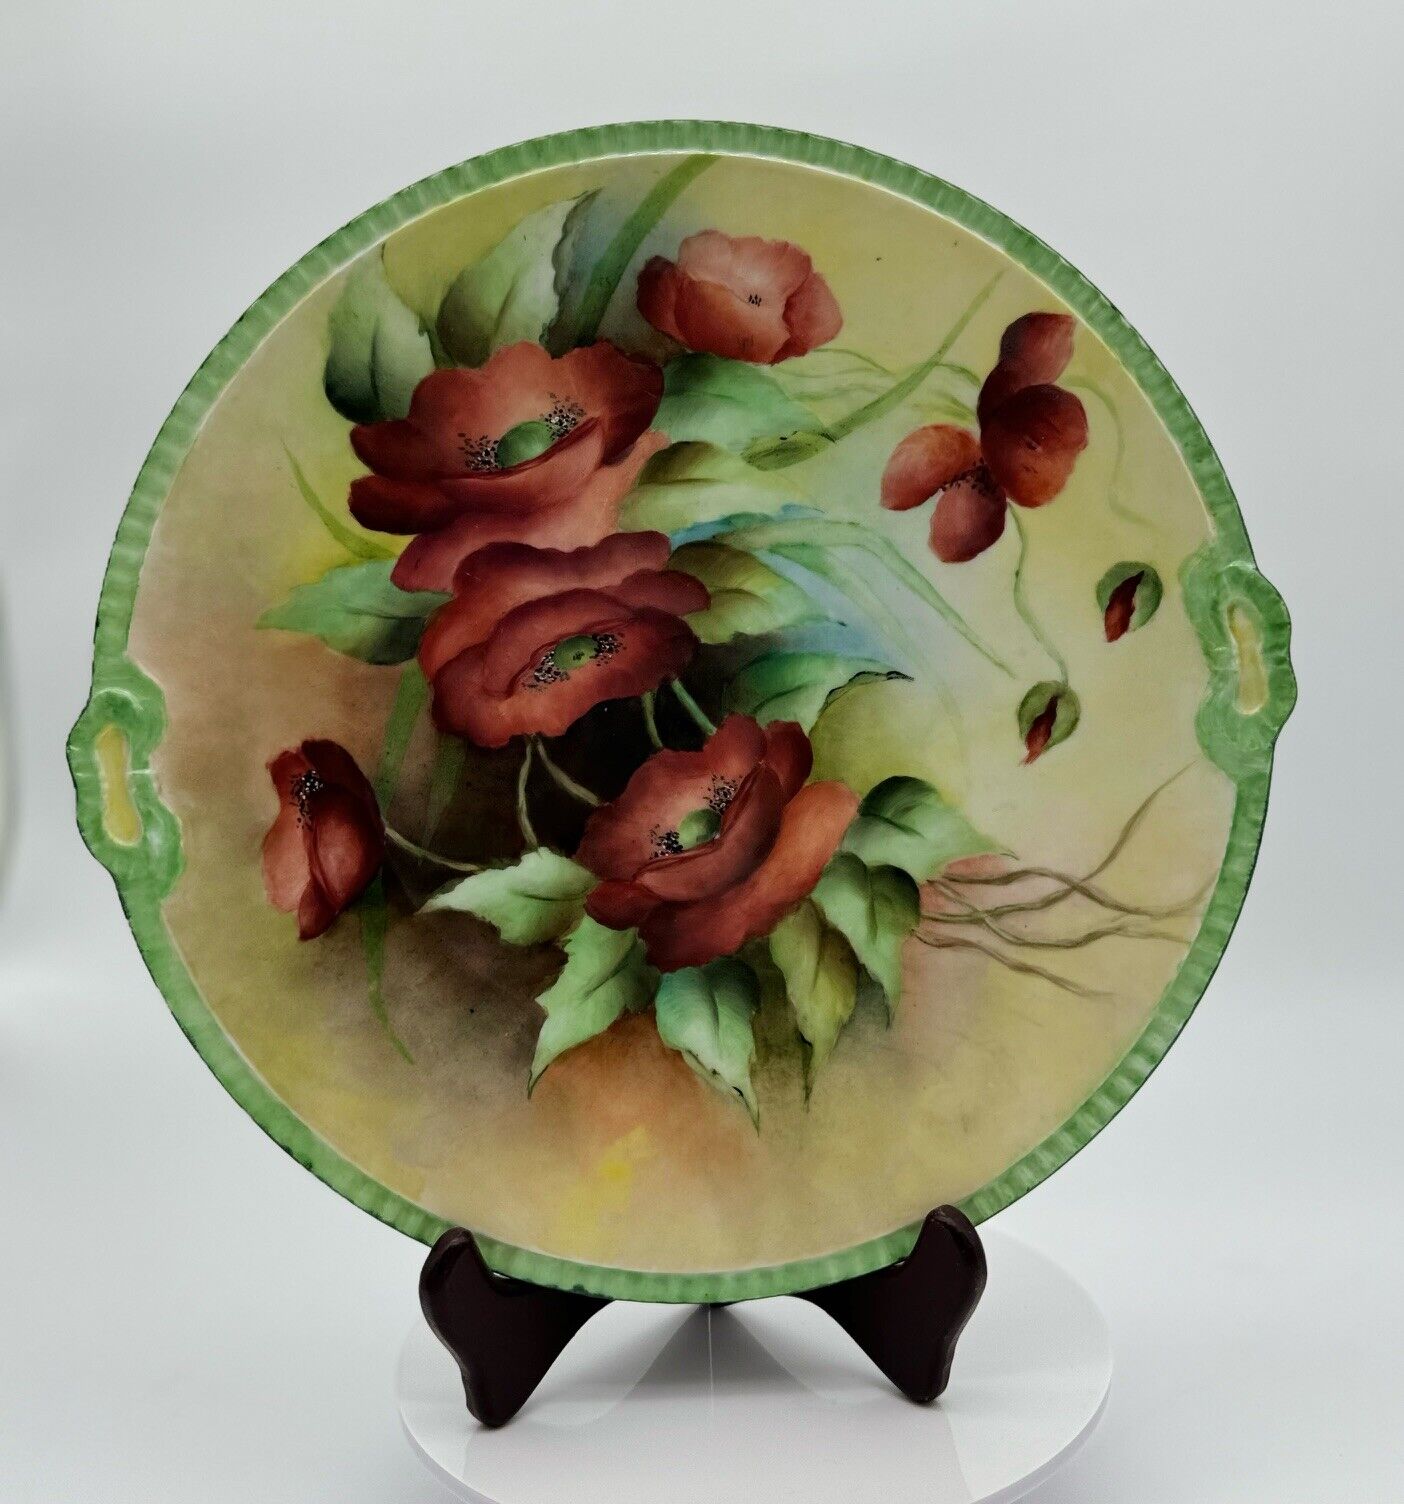 Antique Hand Painted Porcelain Serving Plate - Red Poppies & Green Trim by H.E.R